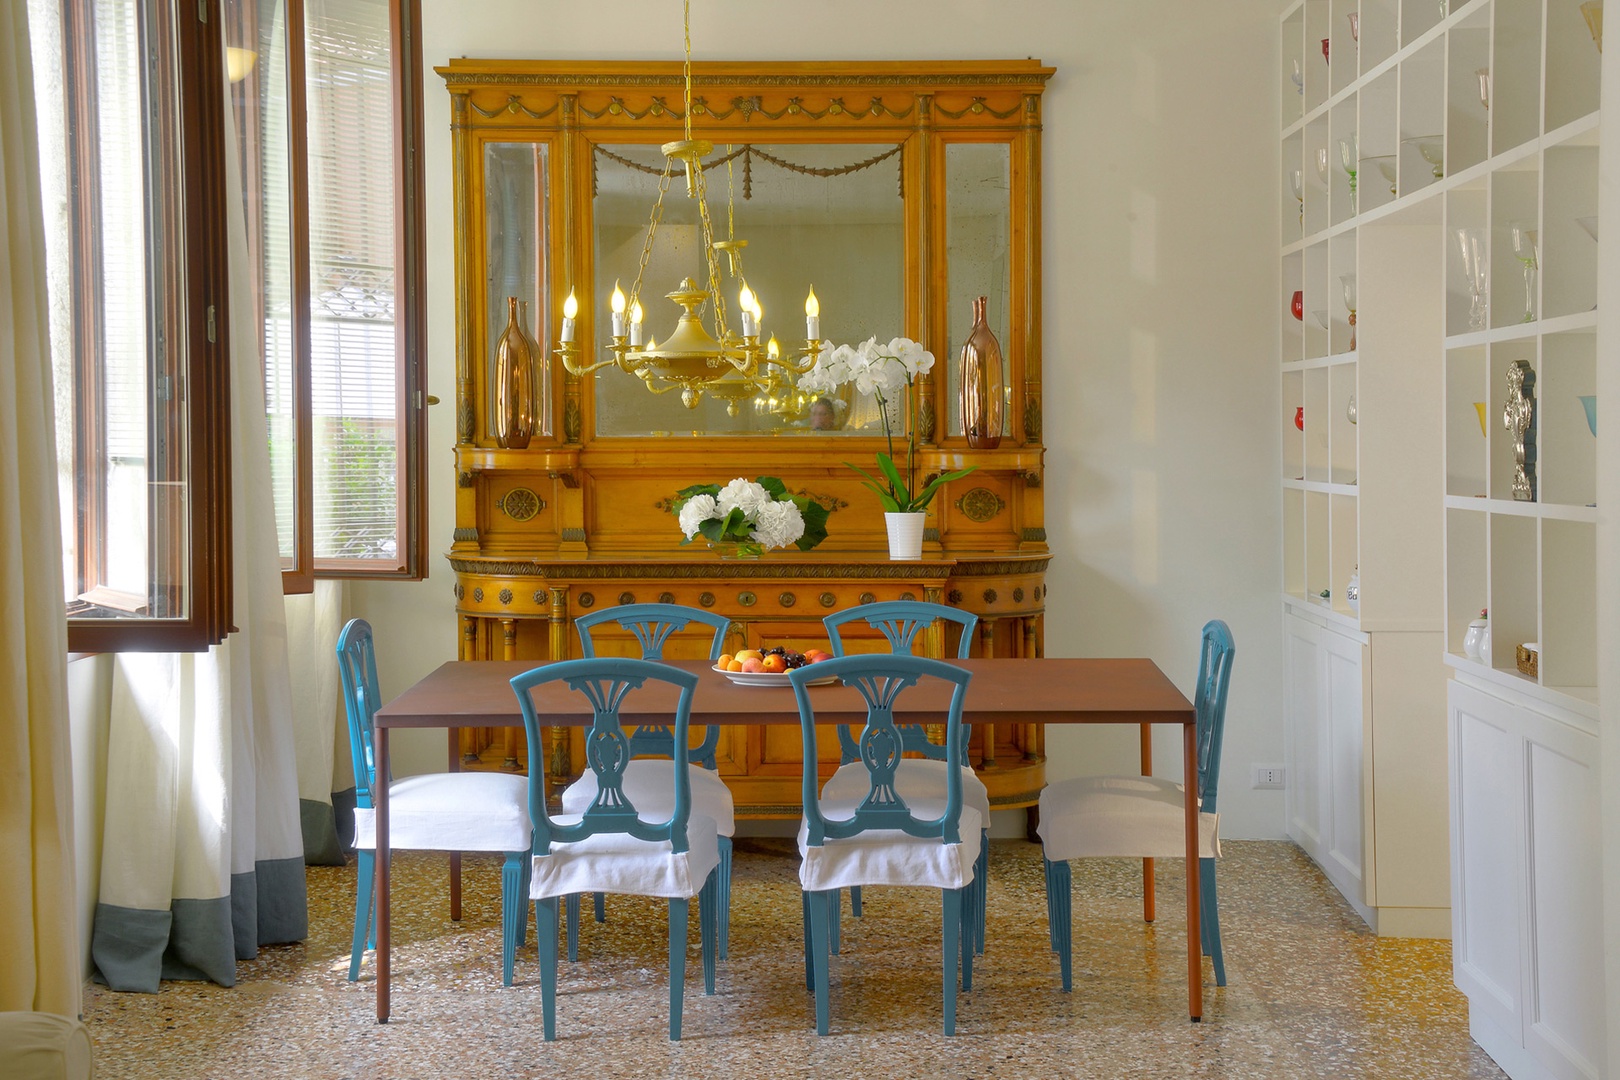 The dining room adjoins the living room with a gorgeous antique sideboard.